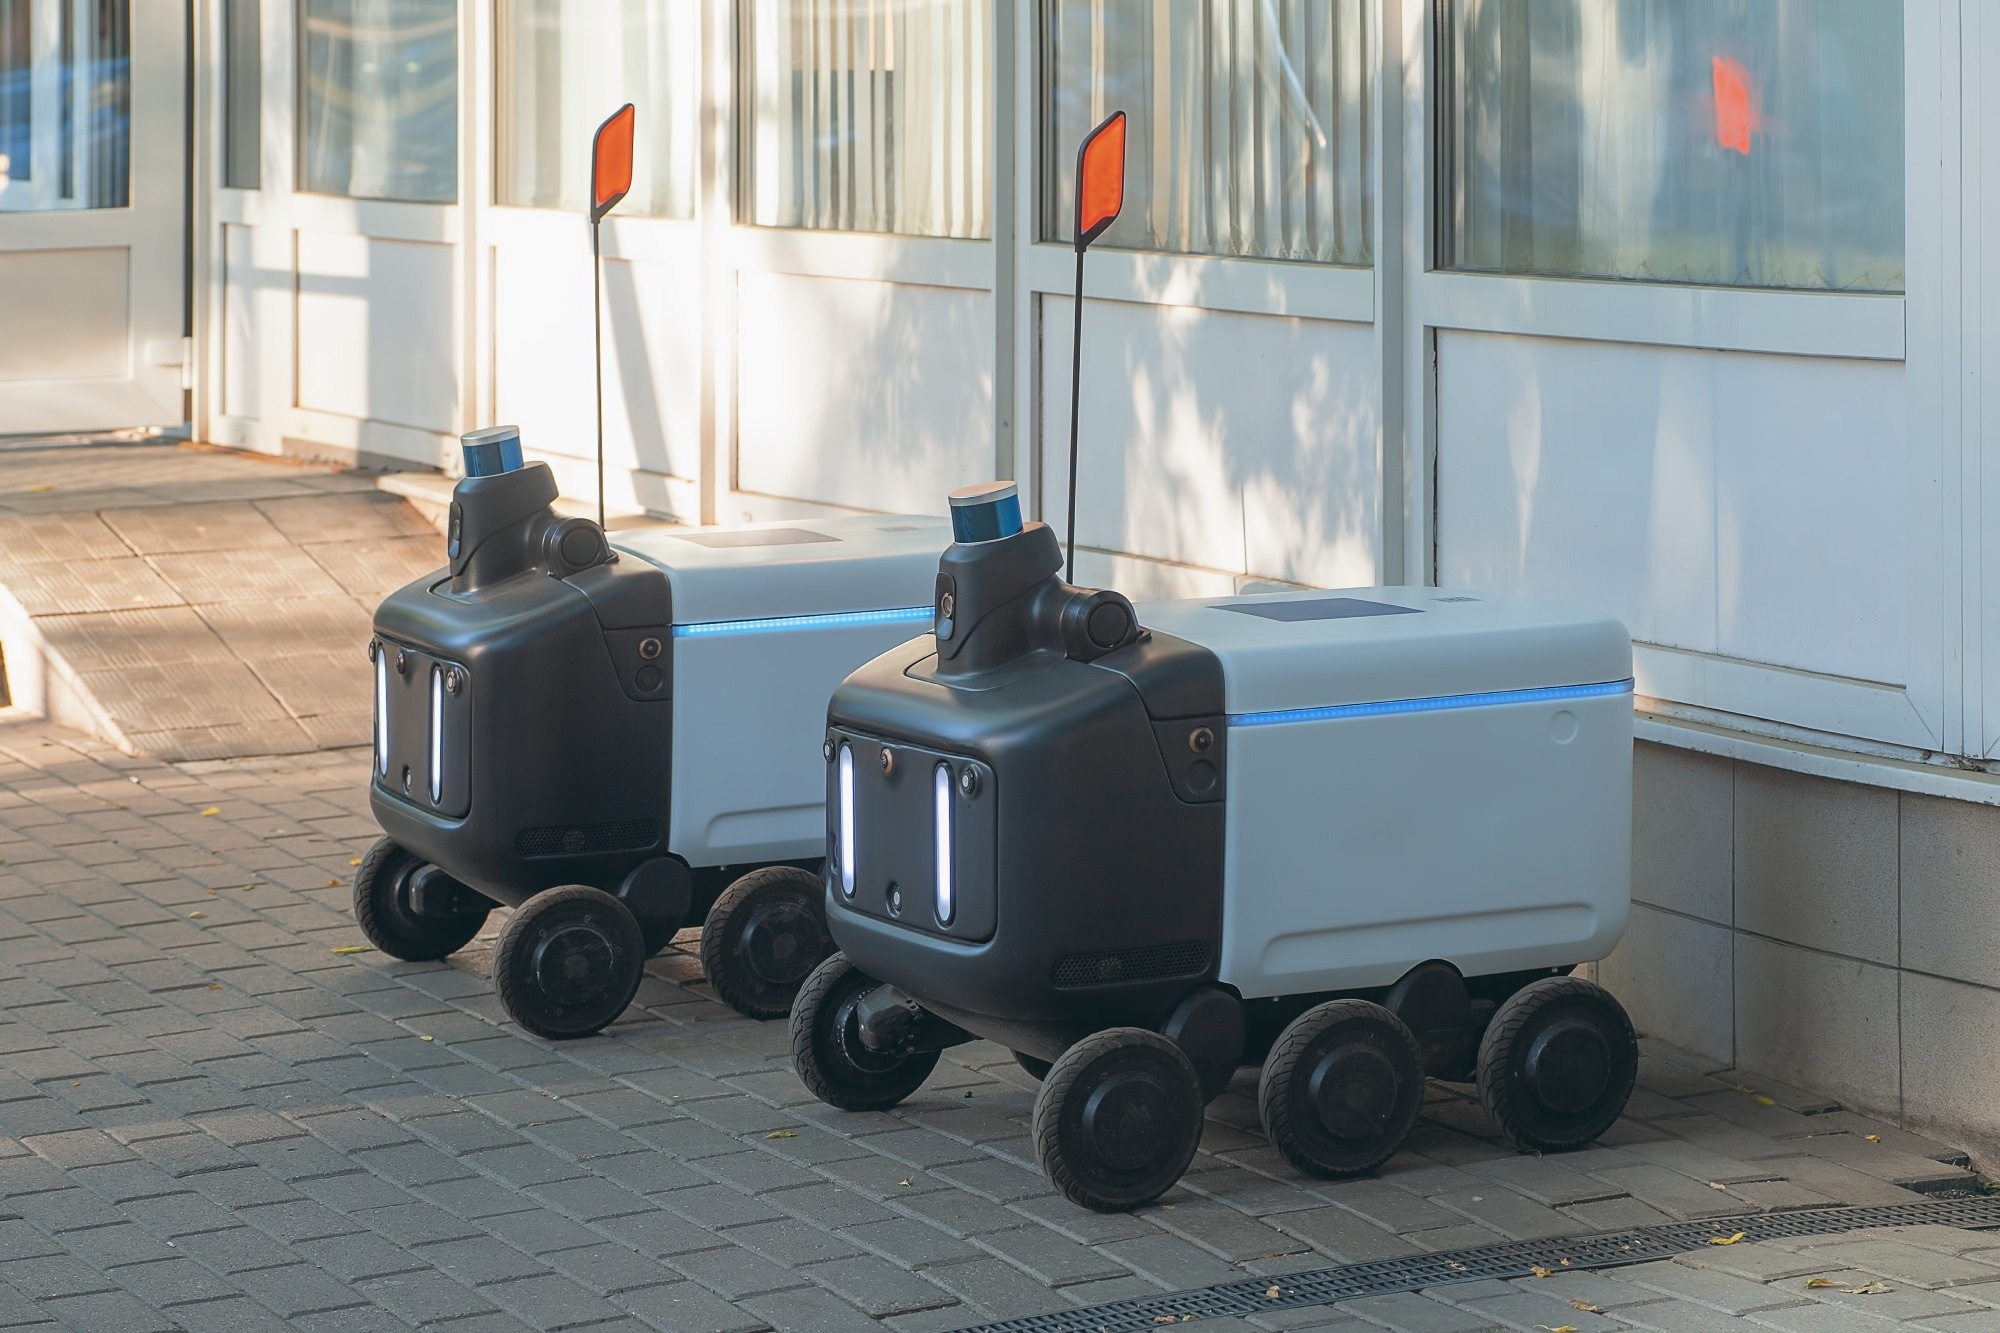 Improved Trajectory Tracking for Car-Like Mobile Robots